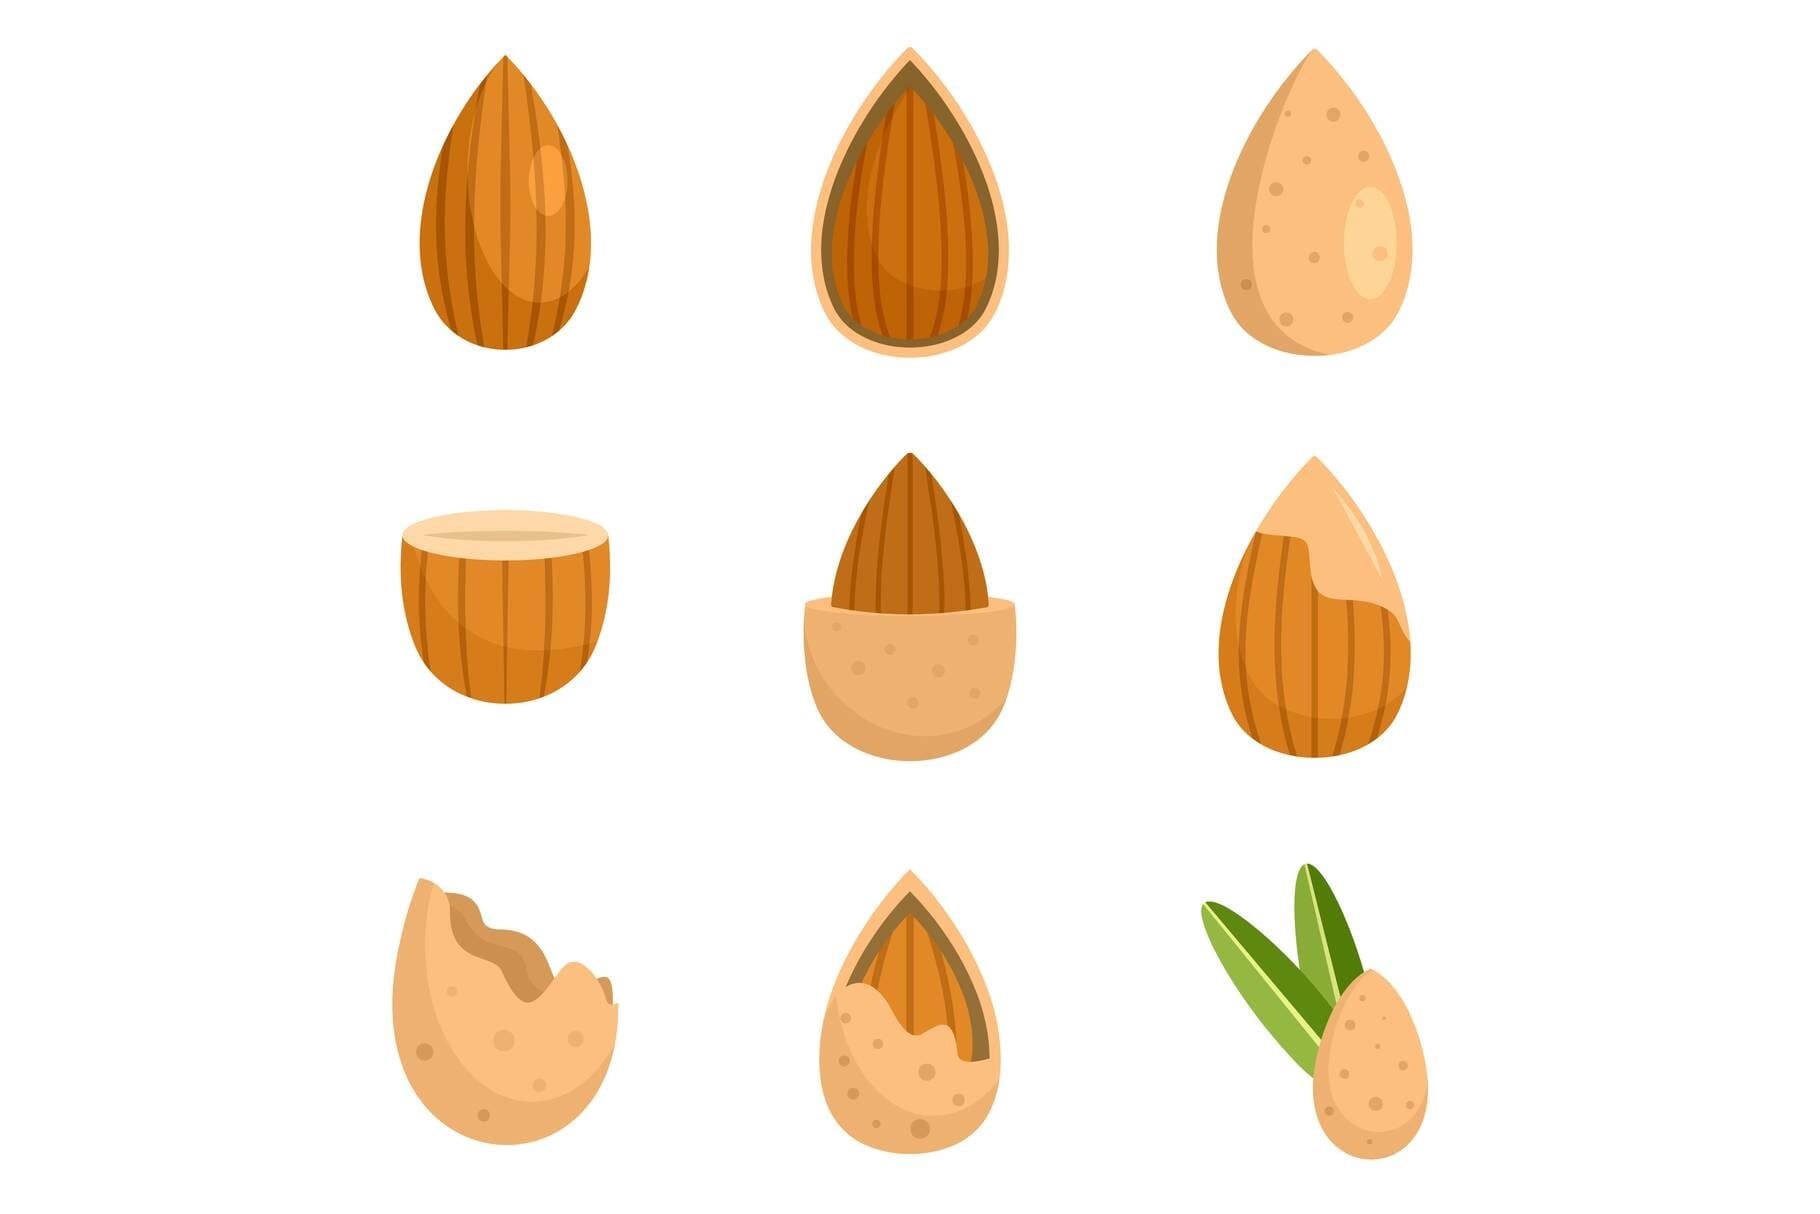 Almonds of different types on a white background.